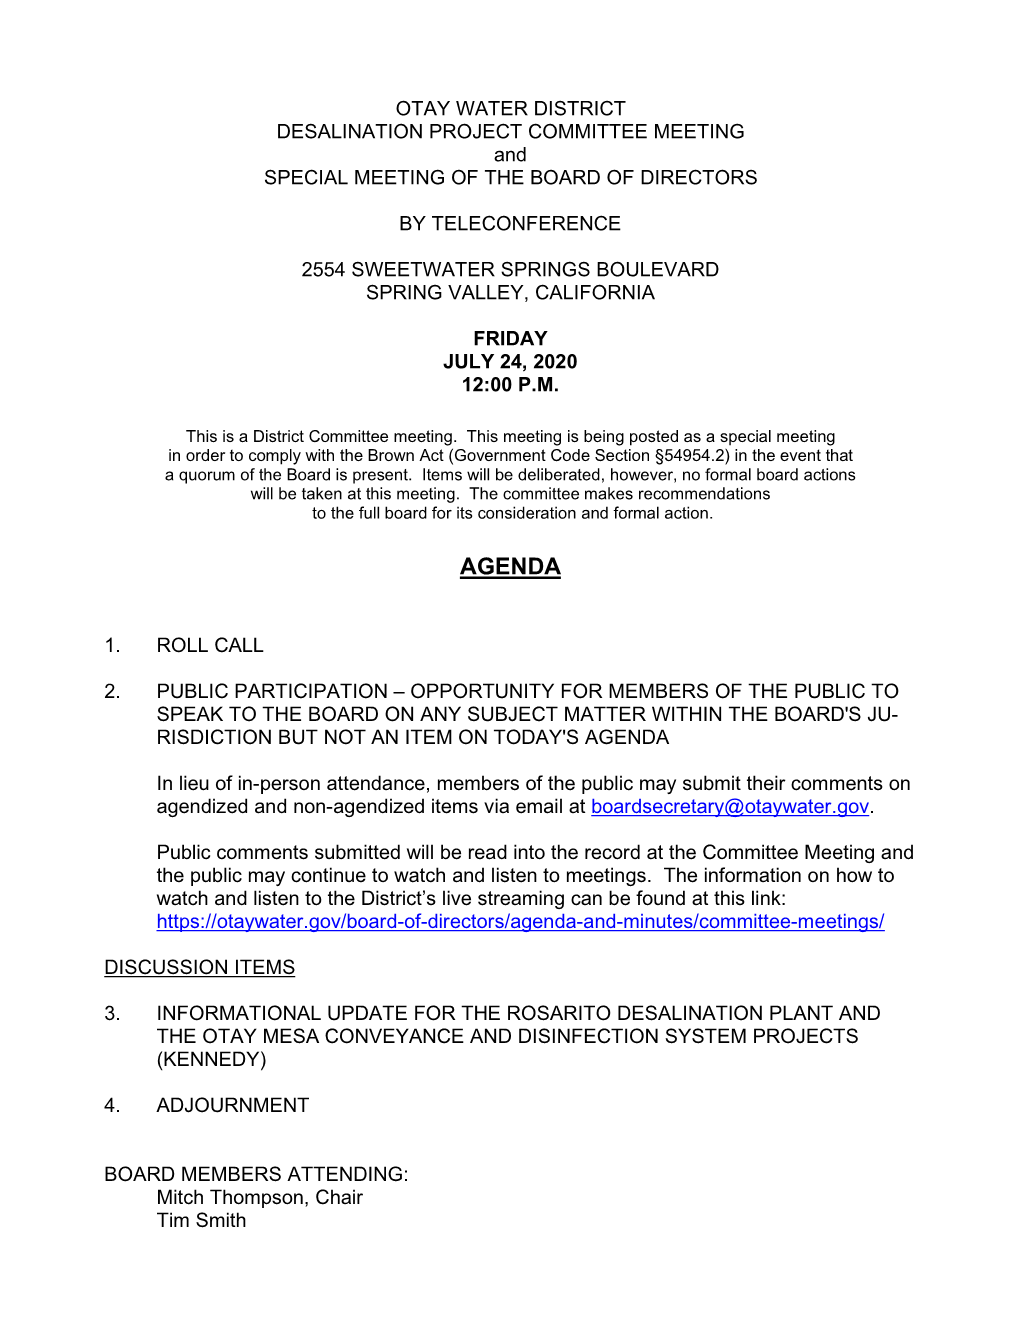 07-24-20 Desalination Project Committee